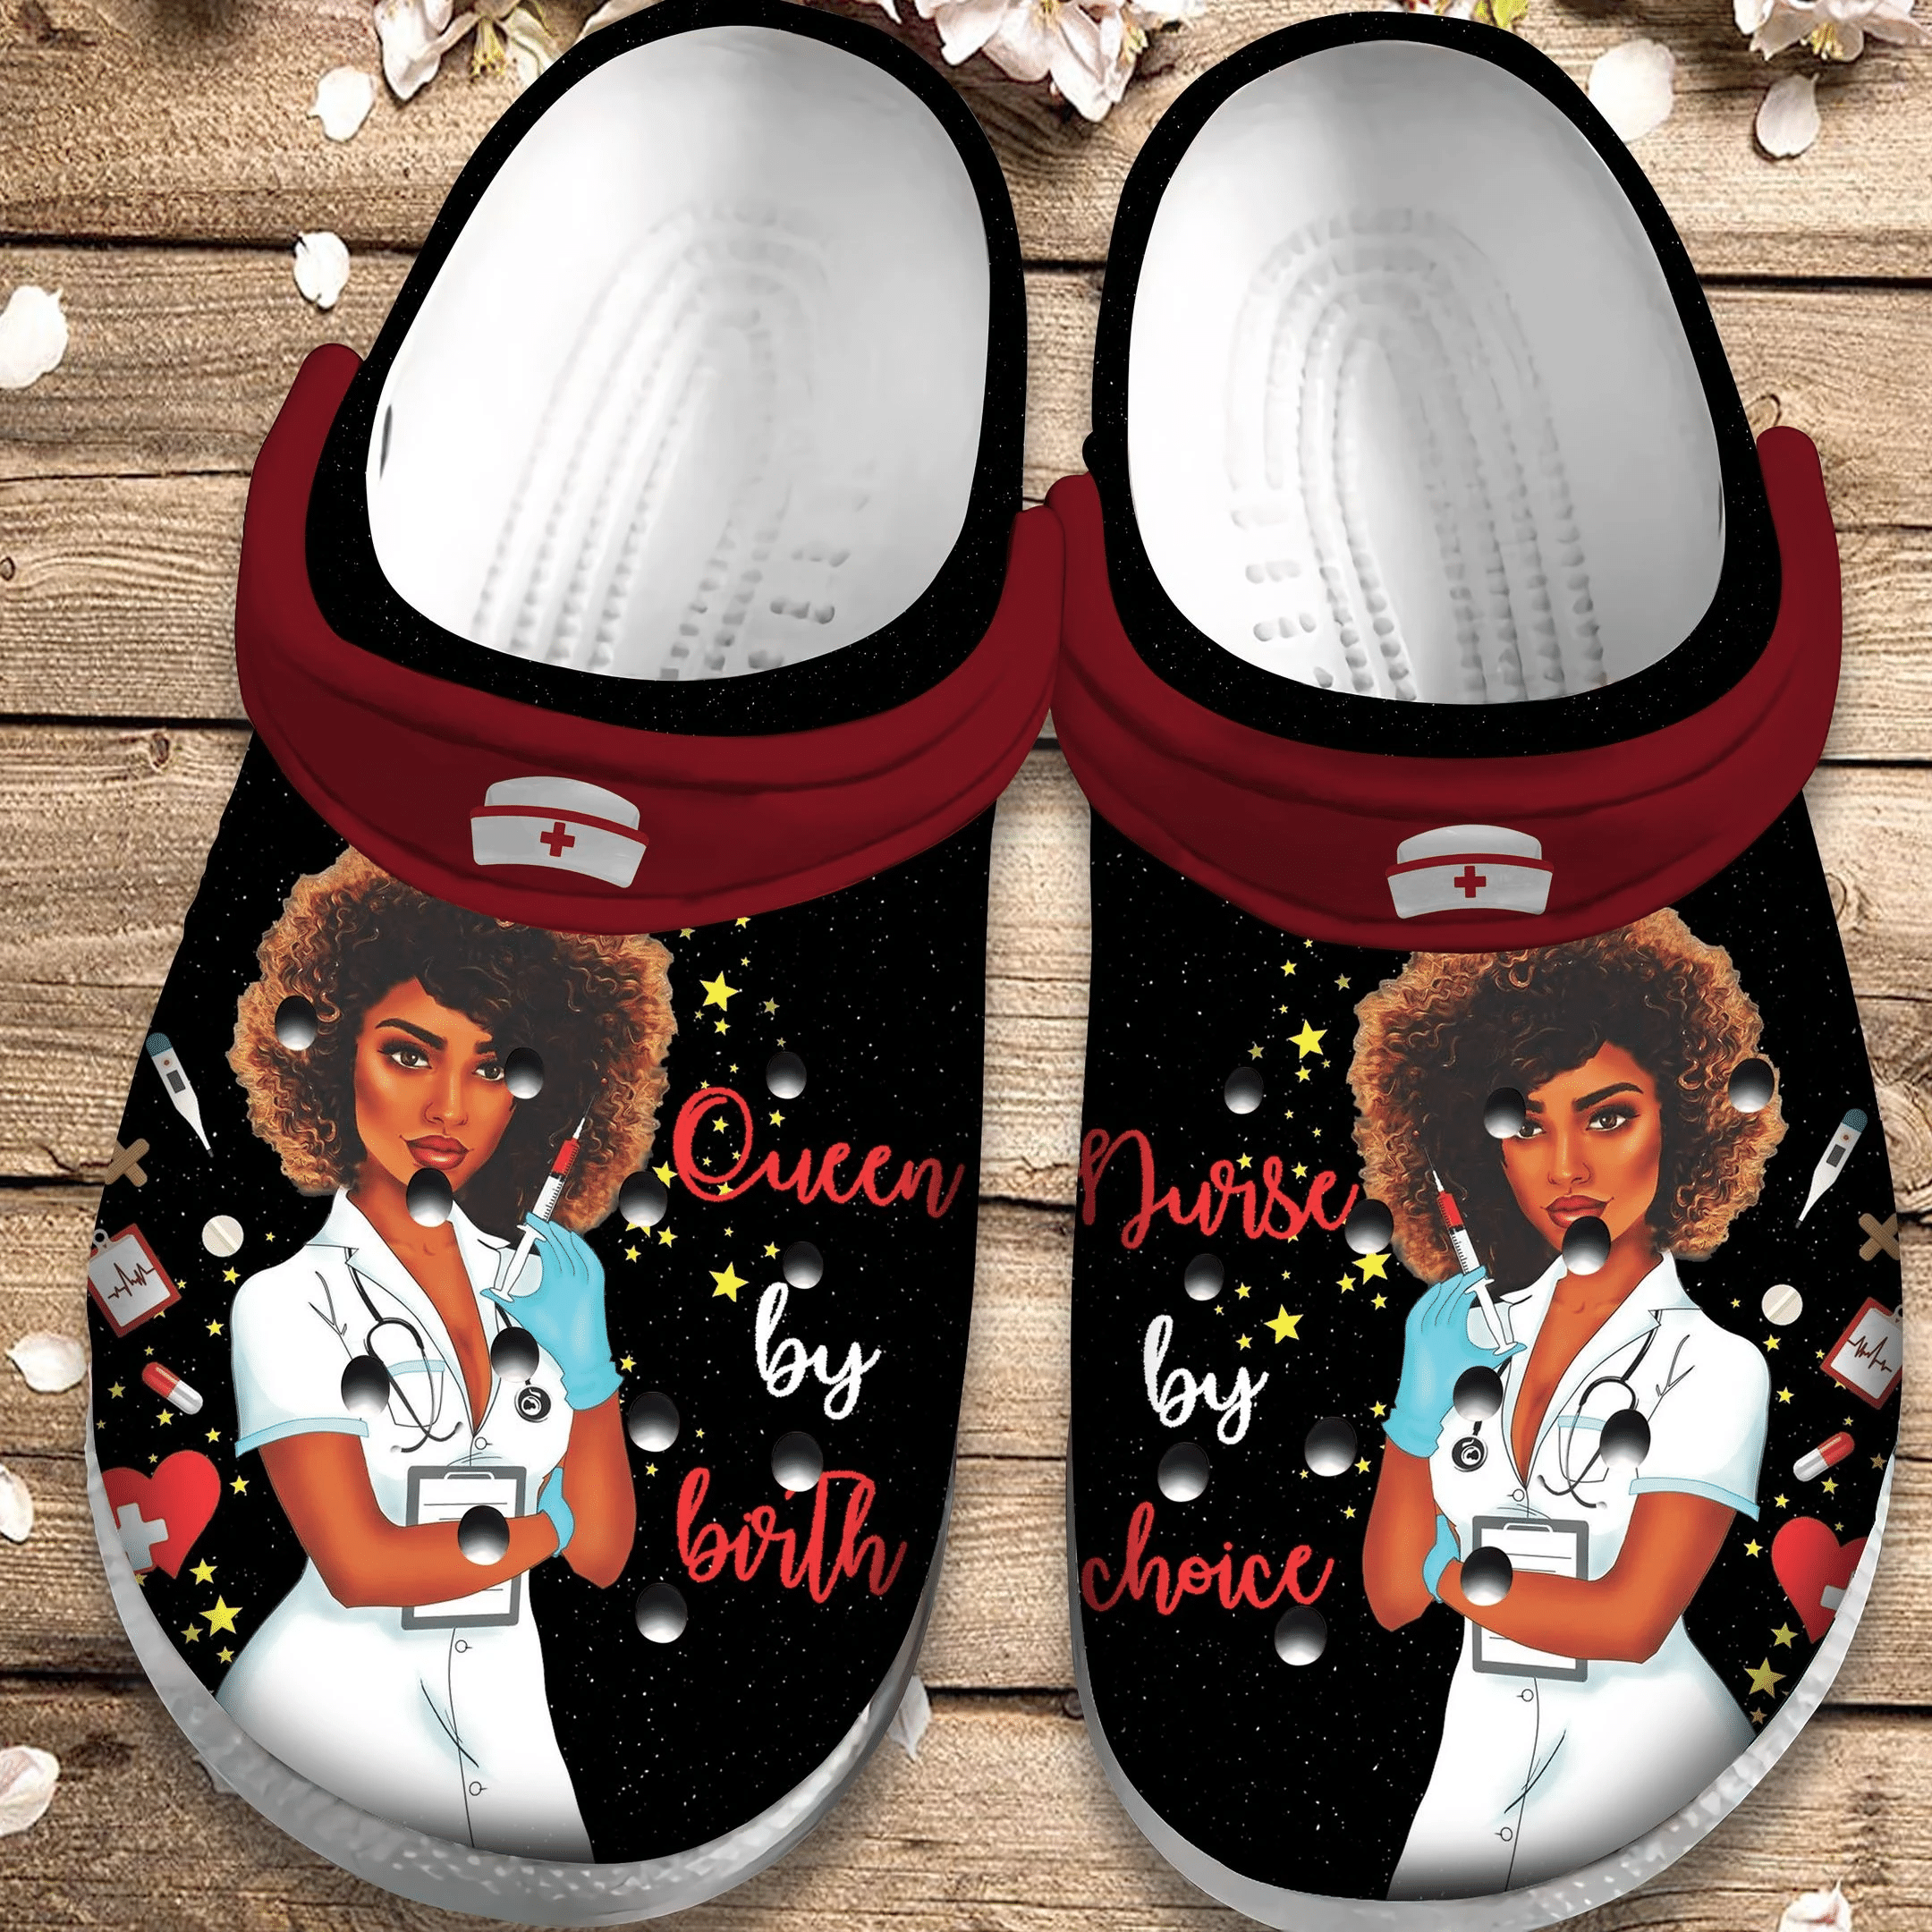 Queen By Birth Crocs Clog Shoes  Nurse By Choice Crocbland Clog Birthday Gift For Woman Girl Friend